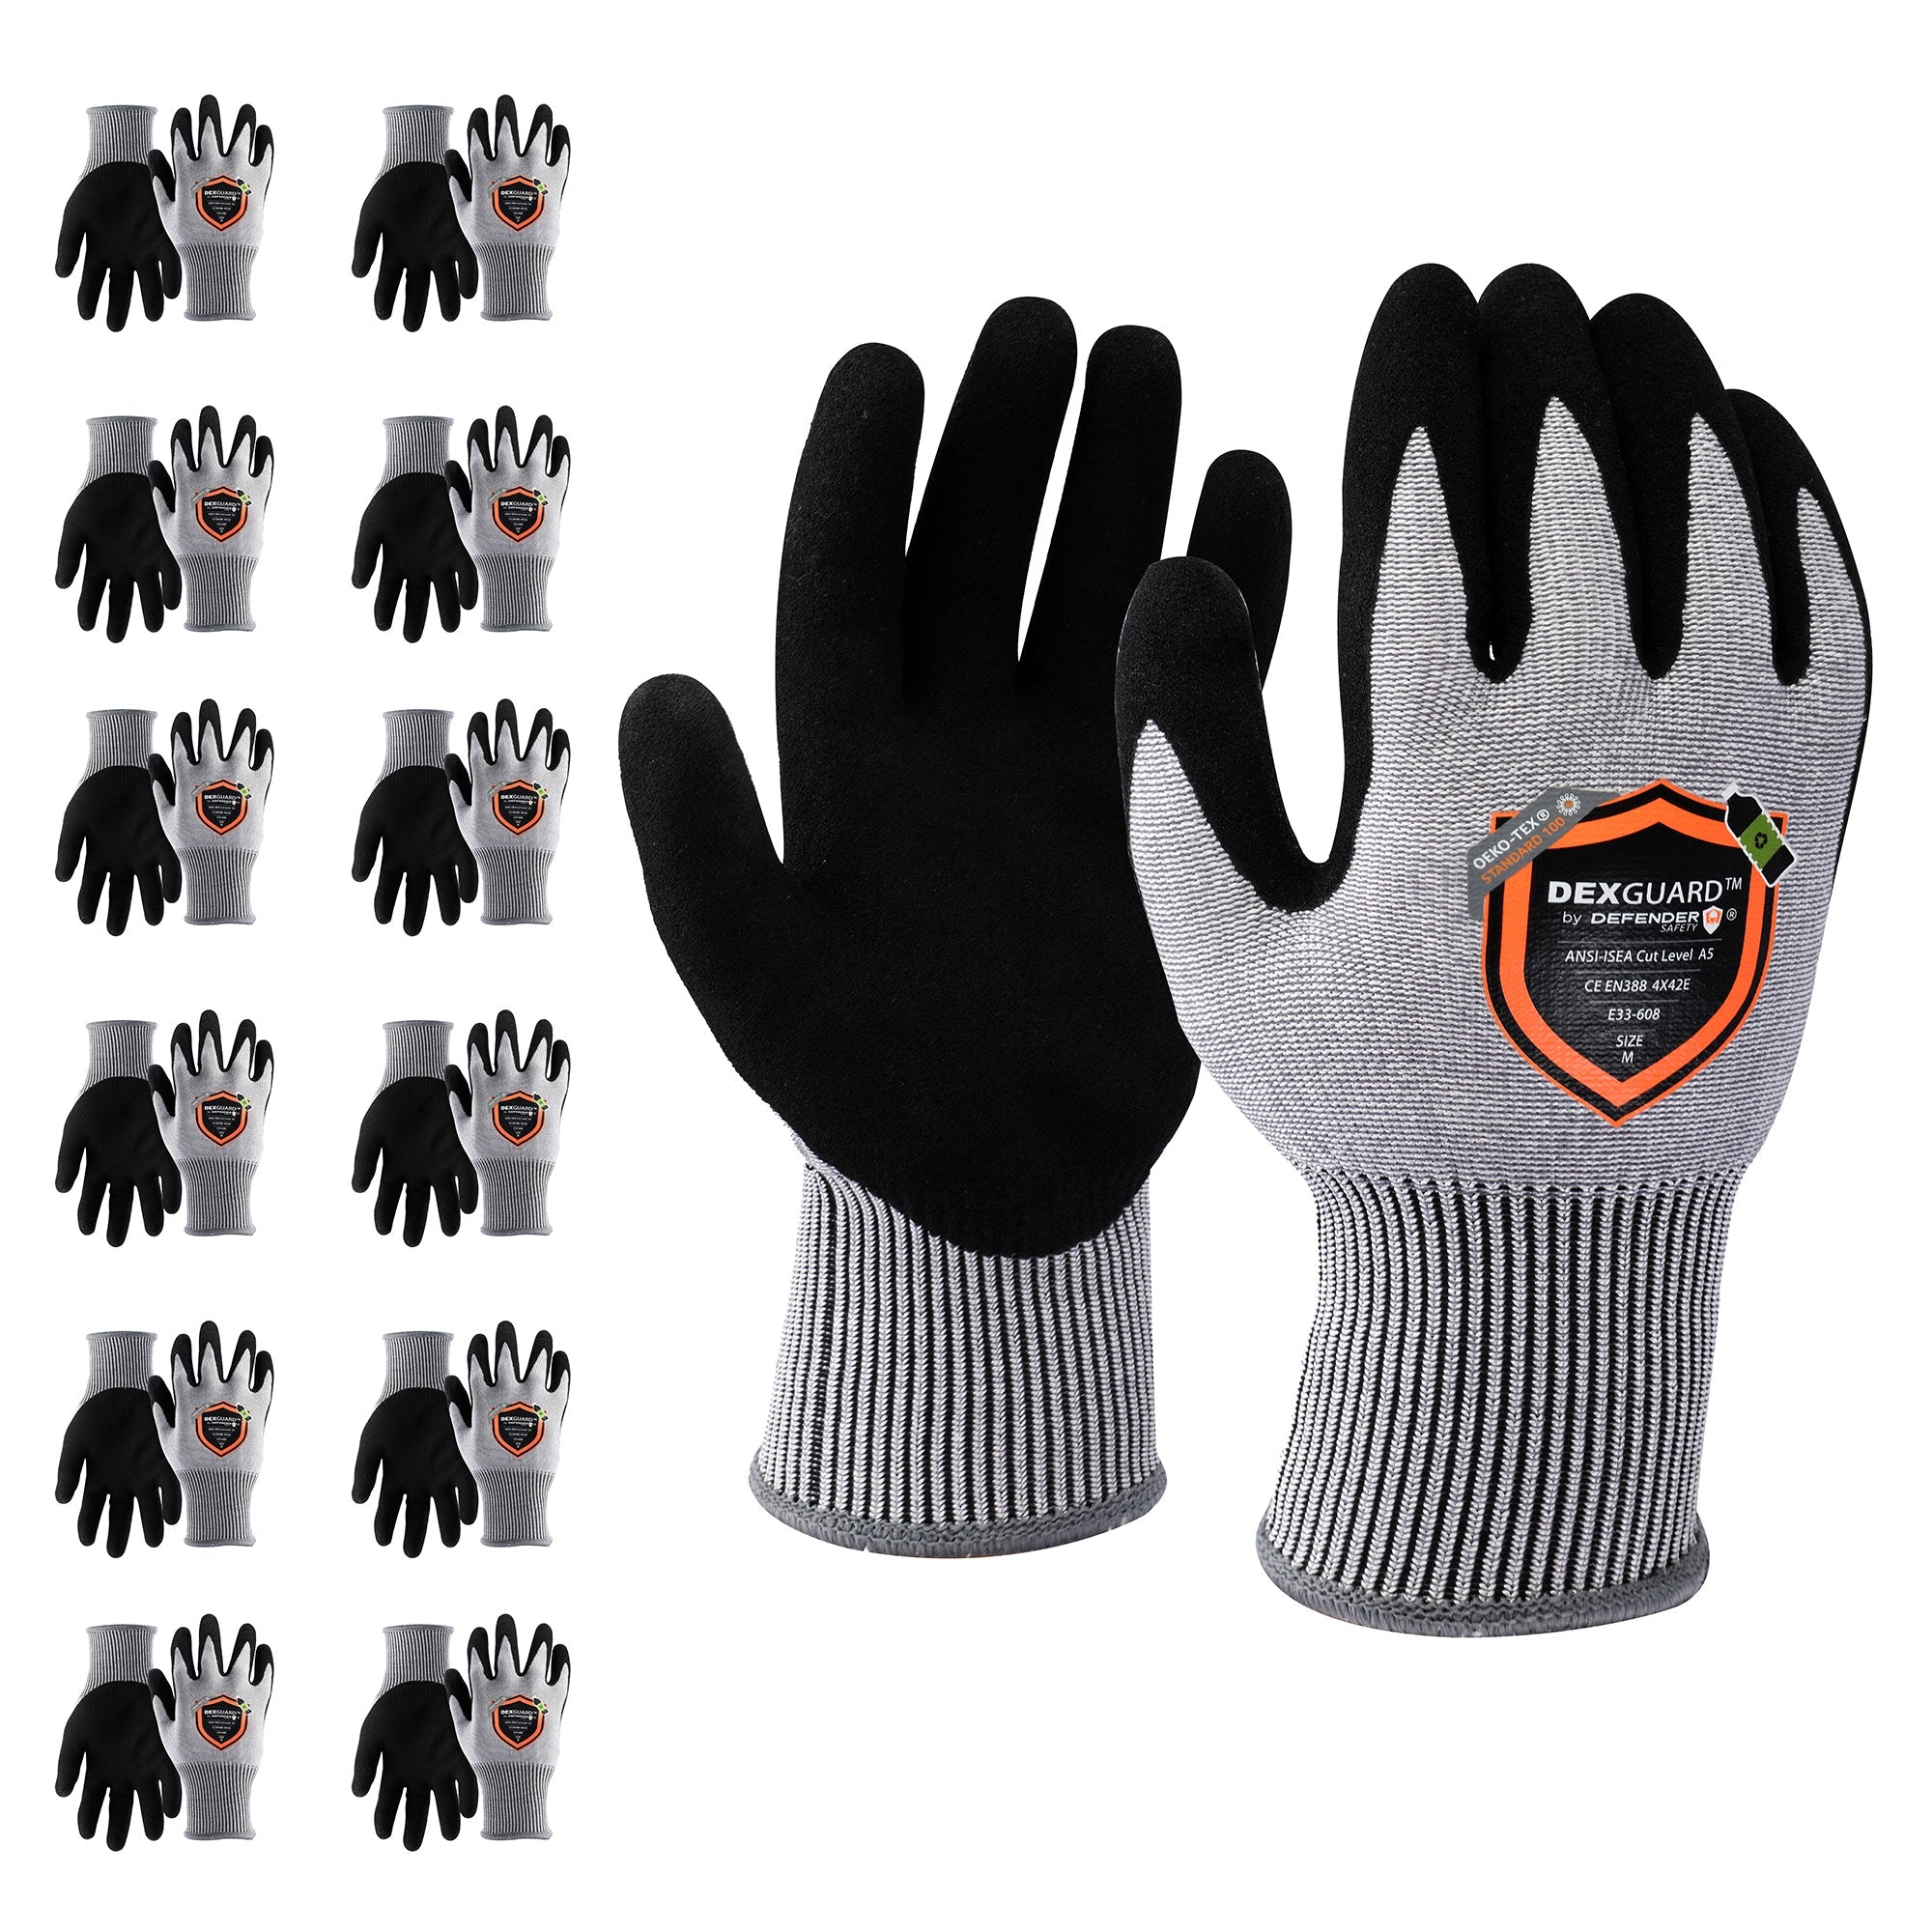 DEXGUARD™ A5 Cut Gloves, Cold Weather Thermal Liner, Water Resistant